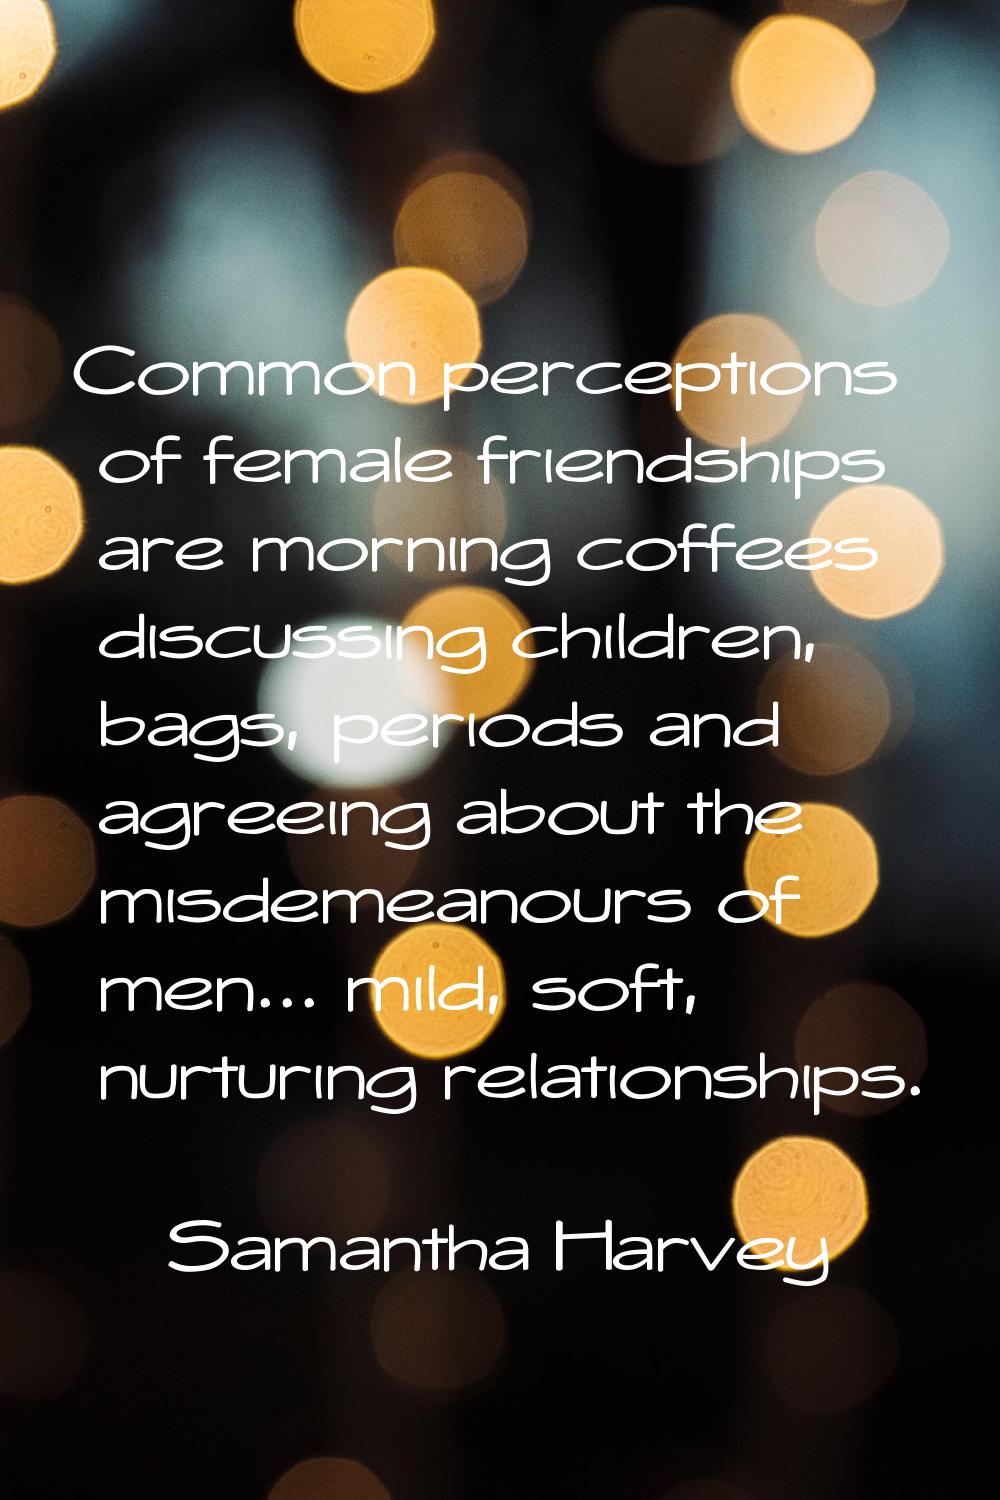 Common perceptions of female friendships are morning coffees discussing children, bags, periods and